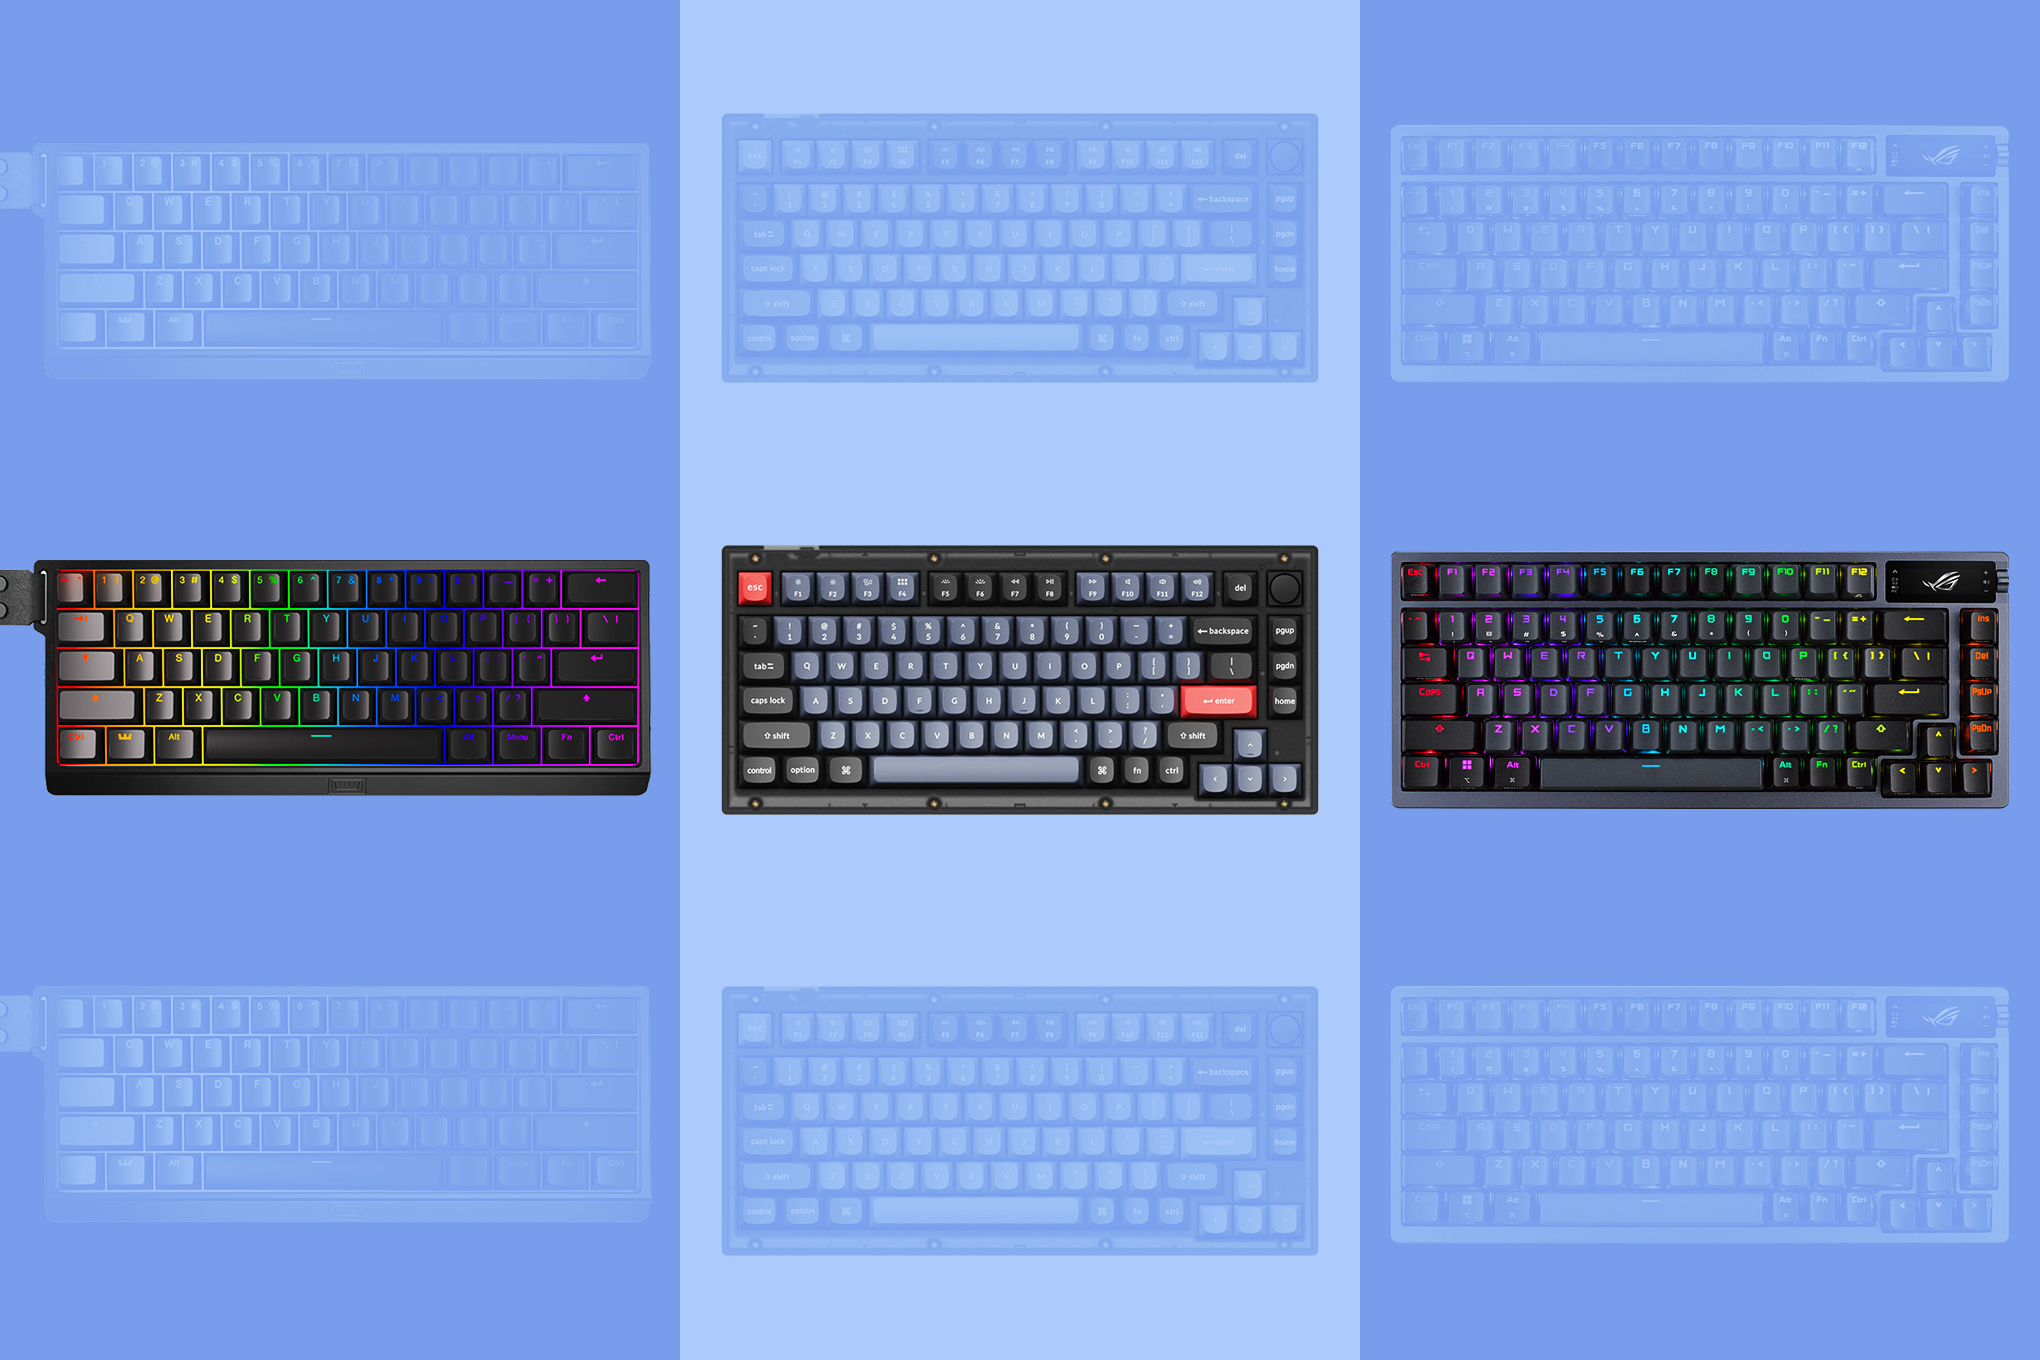 An image featuring three gaming keyboards: the Wooting 60 HE, the Asus ROG Azoth, and the Keychron V1 QMK